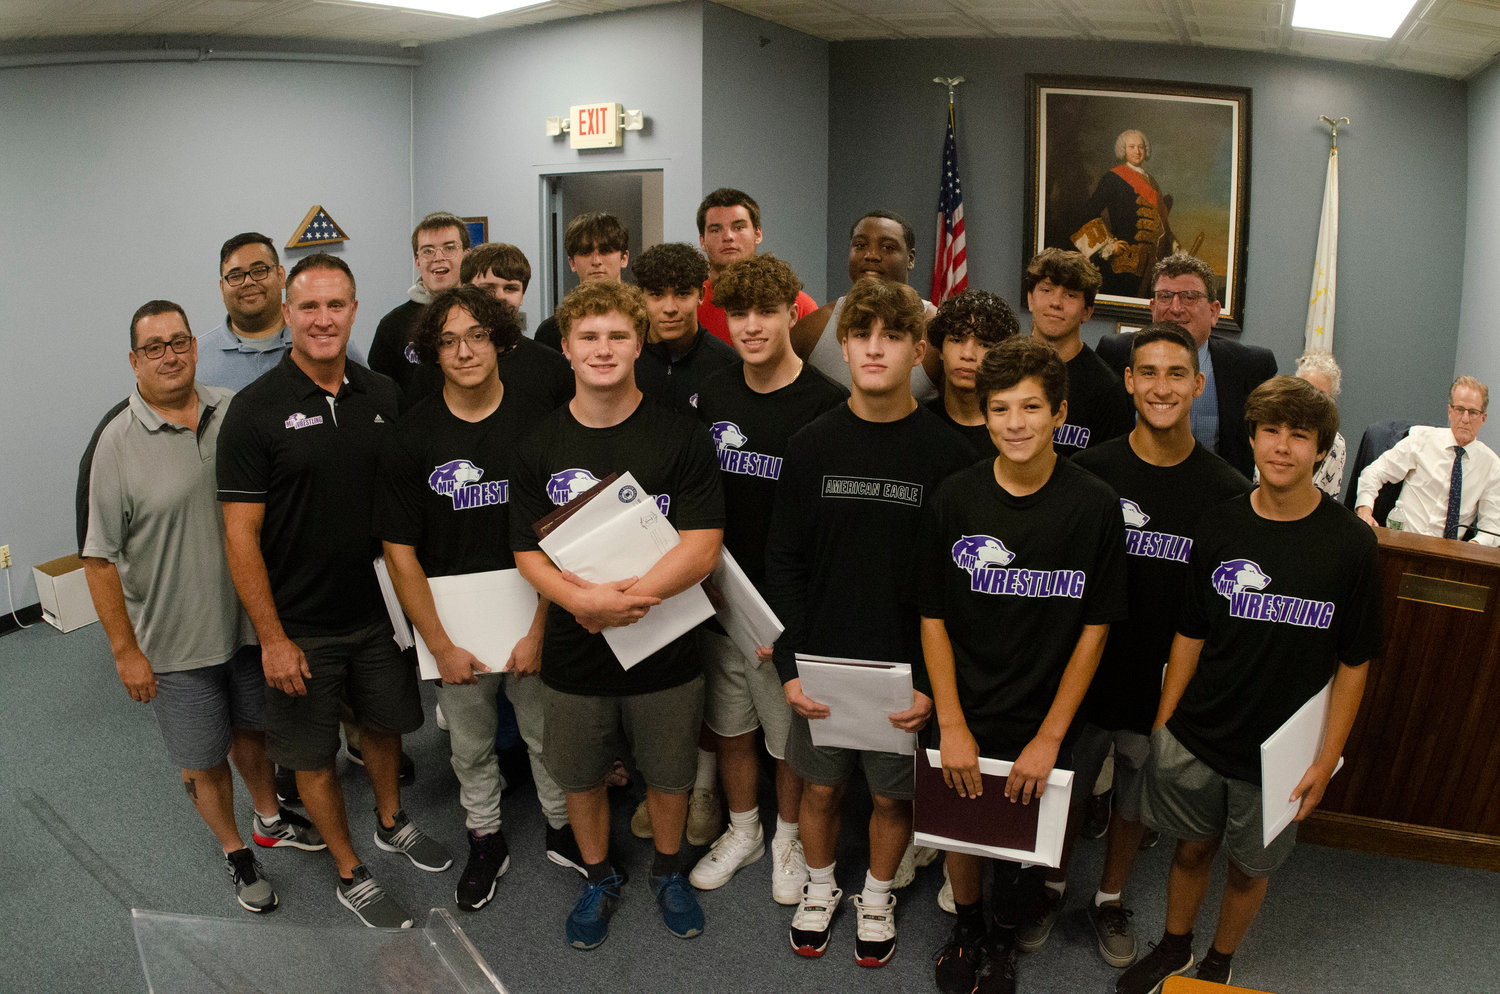 The Mt. Hope High School mens wrestling team was celebrated for their championship season at the Warren Town Council meeting on Aug. 10